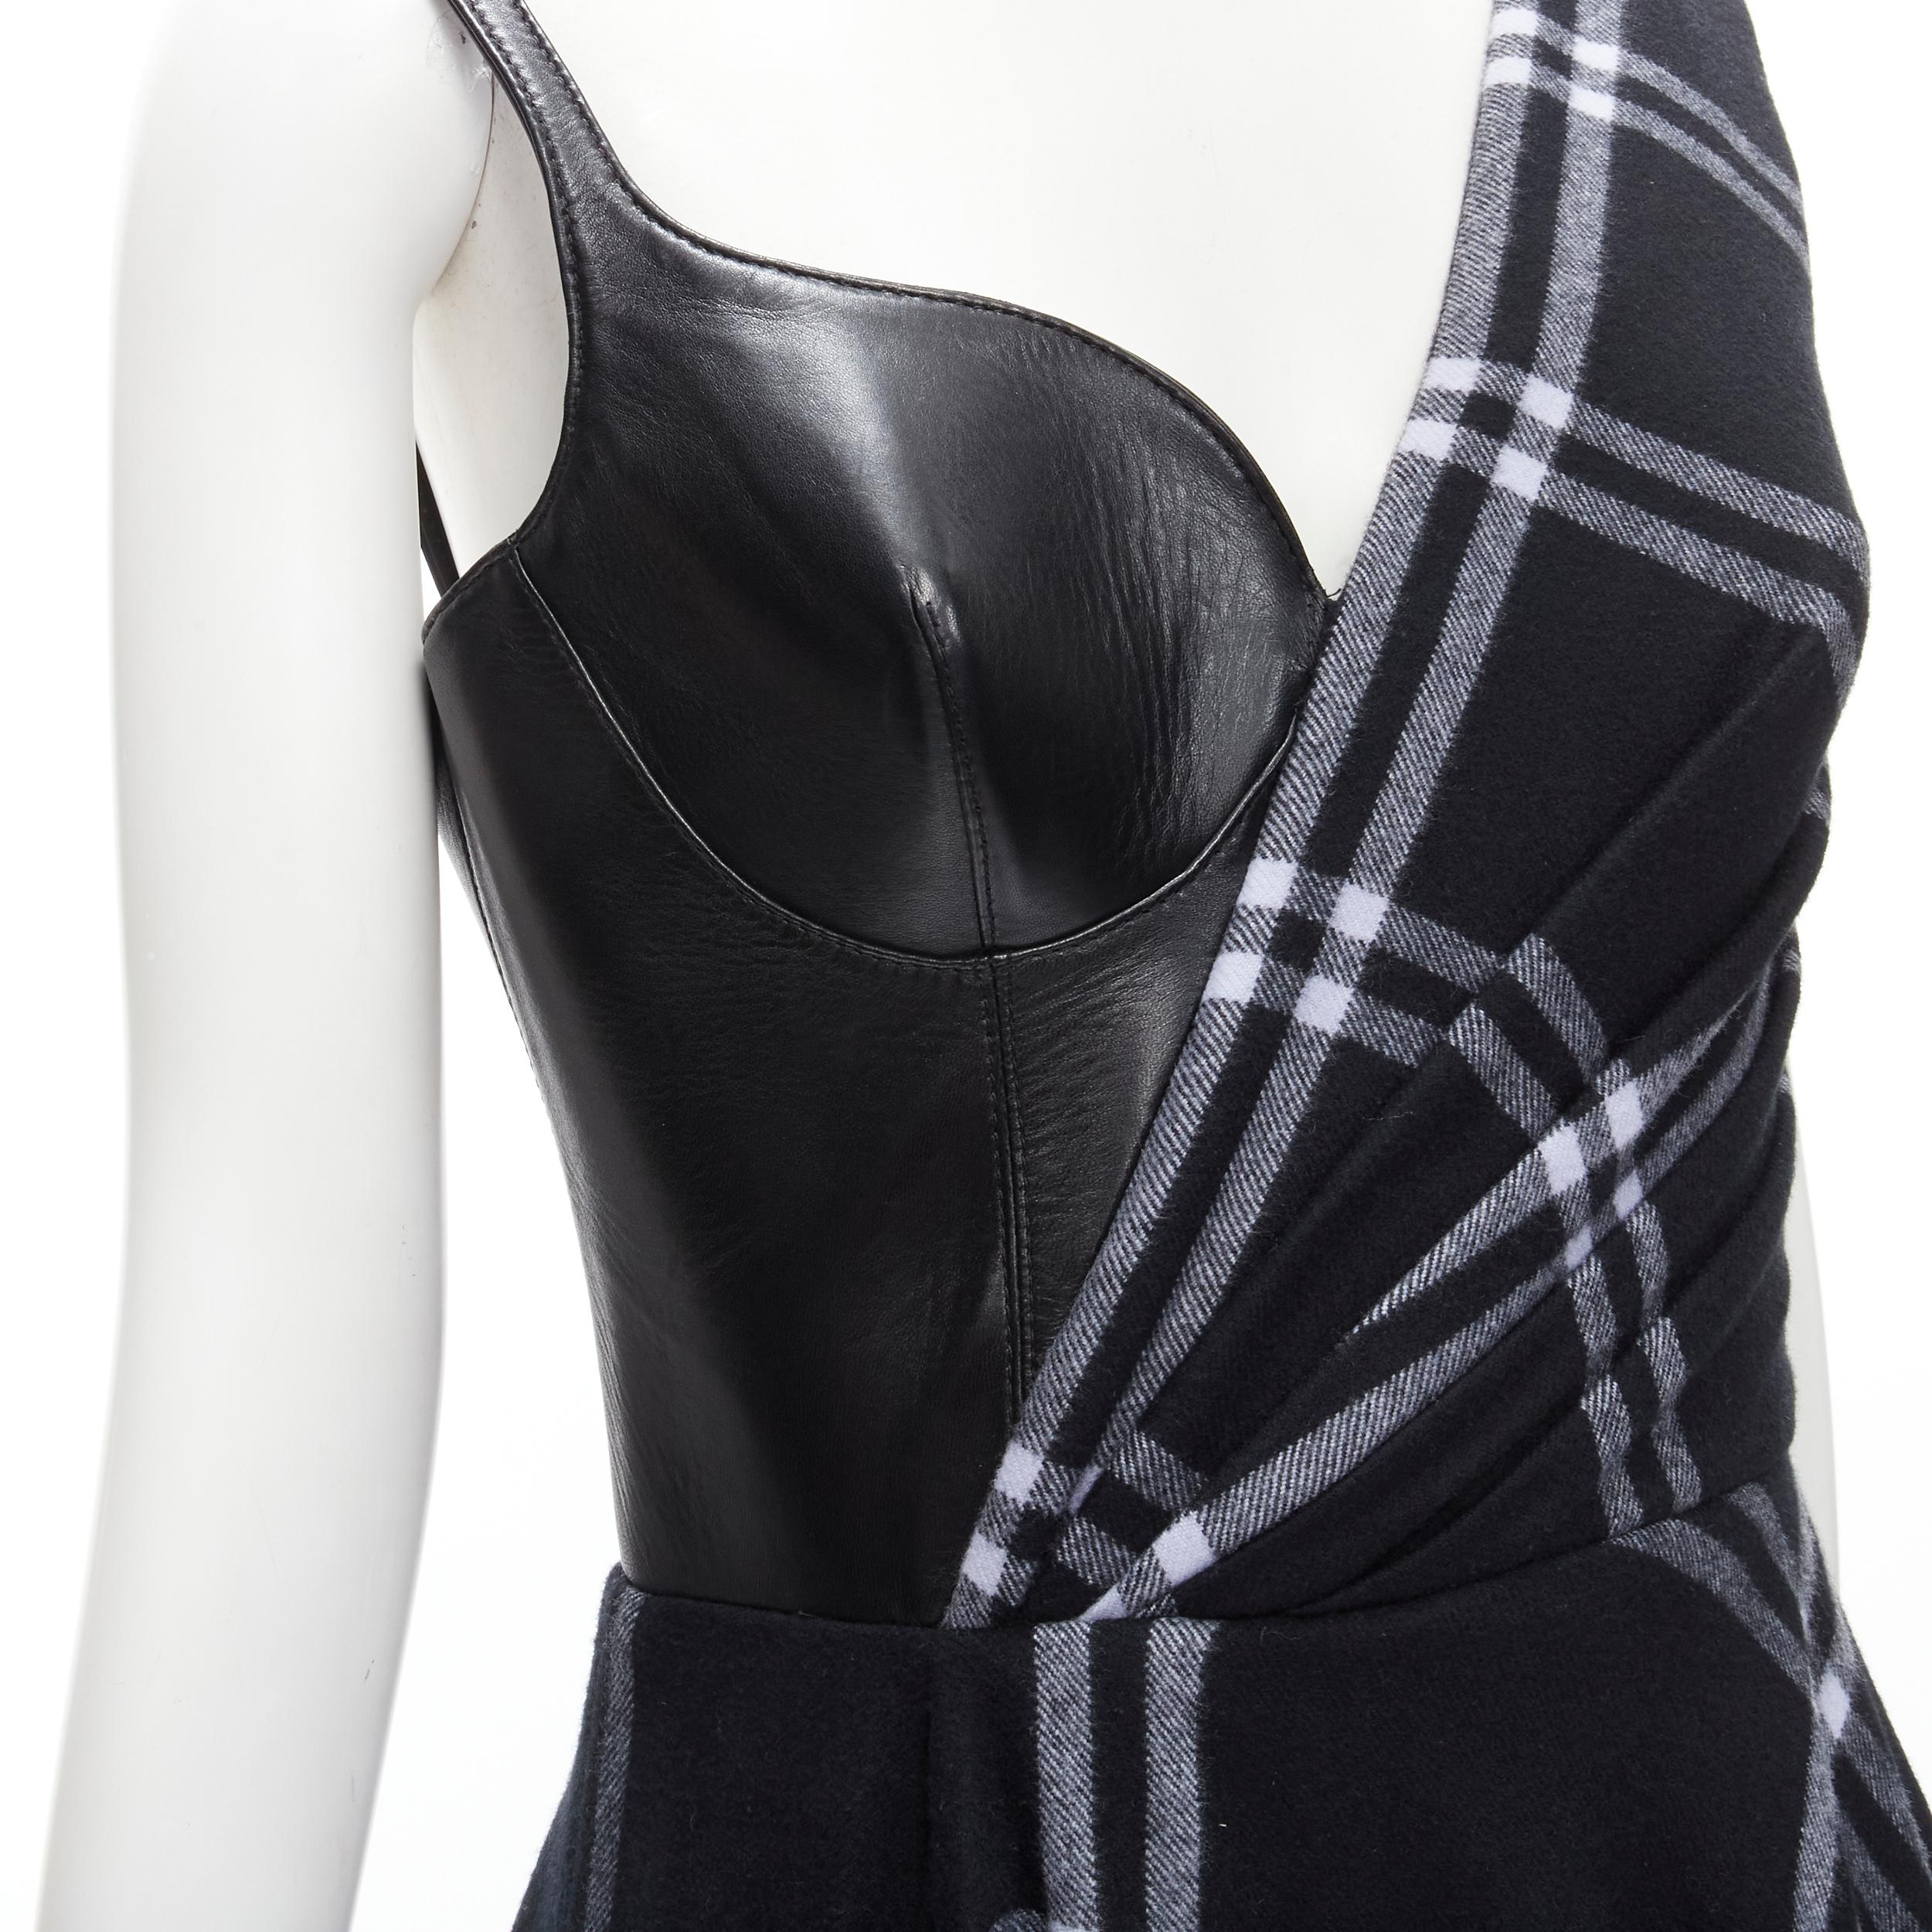 ALEXANDER MCQUEEN 2020 Runway black leather bust navy draped check dress IT42 M 
Reference: KEDG/A00161 
Brand: Alexander McQueen 
Designer: Sarah Burton 
Collection: Fall Winter 2020 Runway 
Material: Leather 
Color: Navy 
Pattern: Check 
Closure: